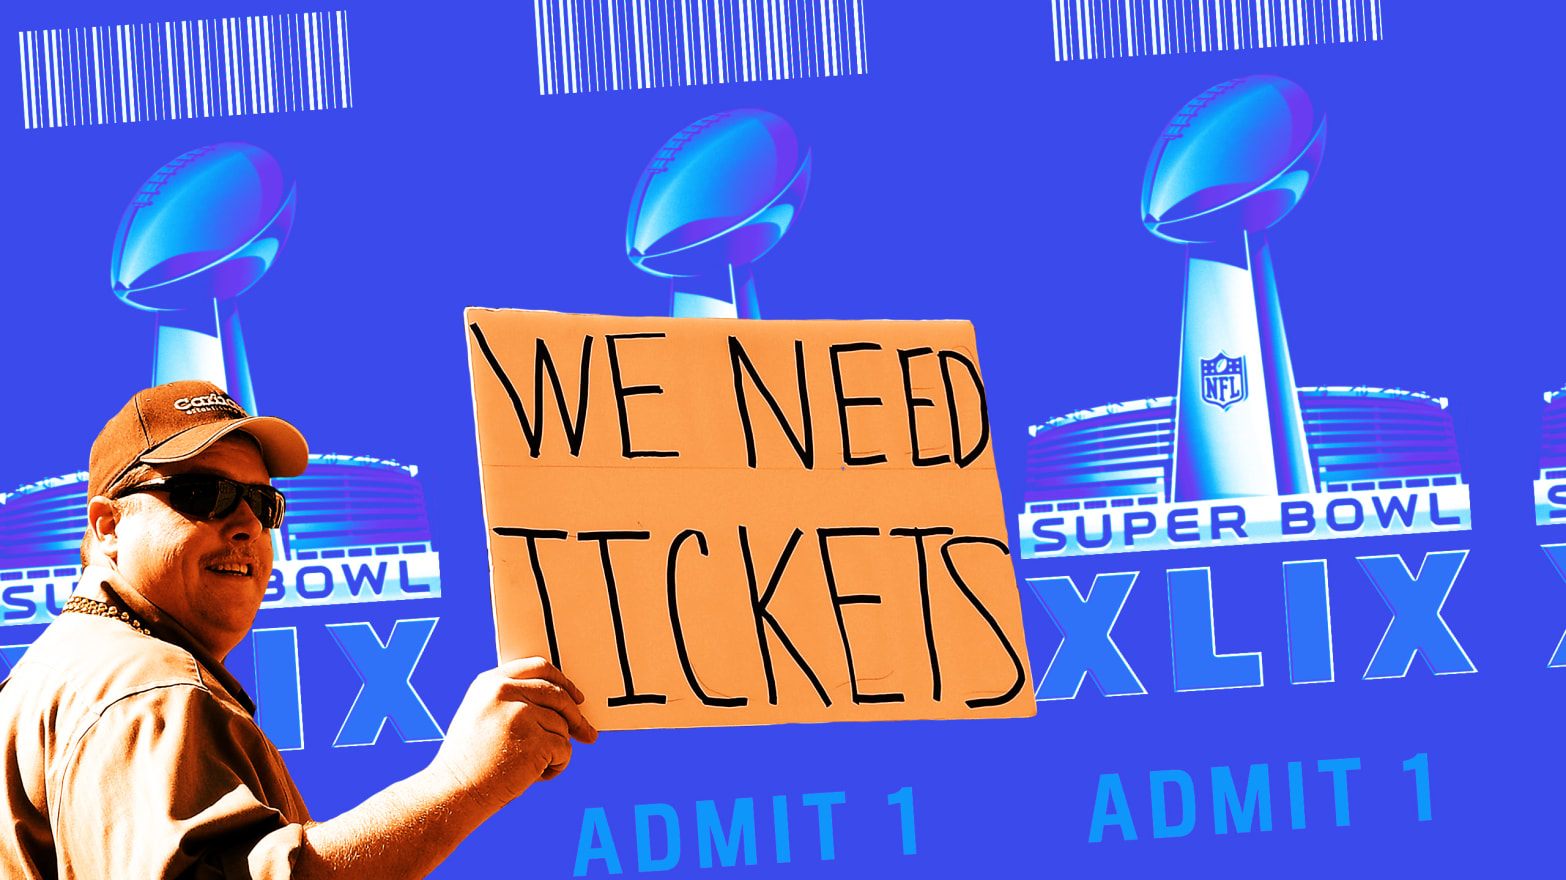 the most expensive ticket for the super bowl